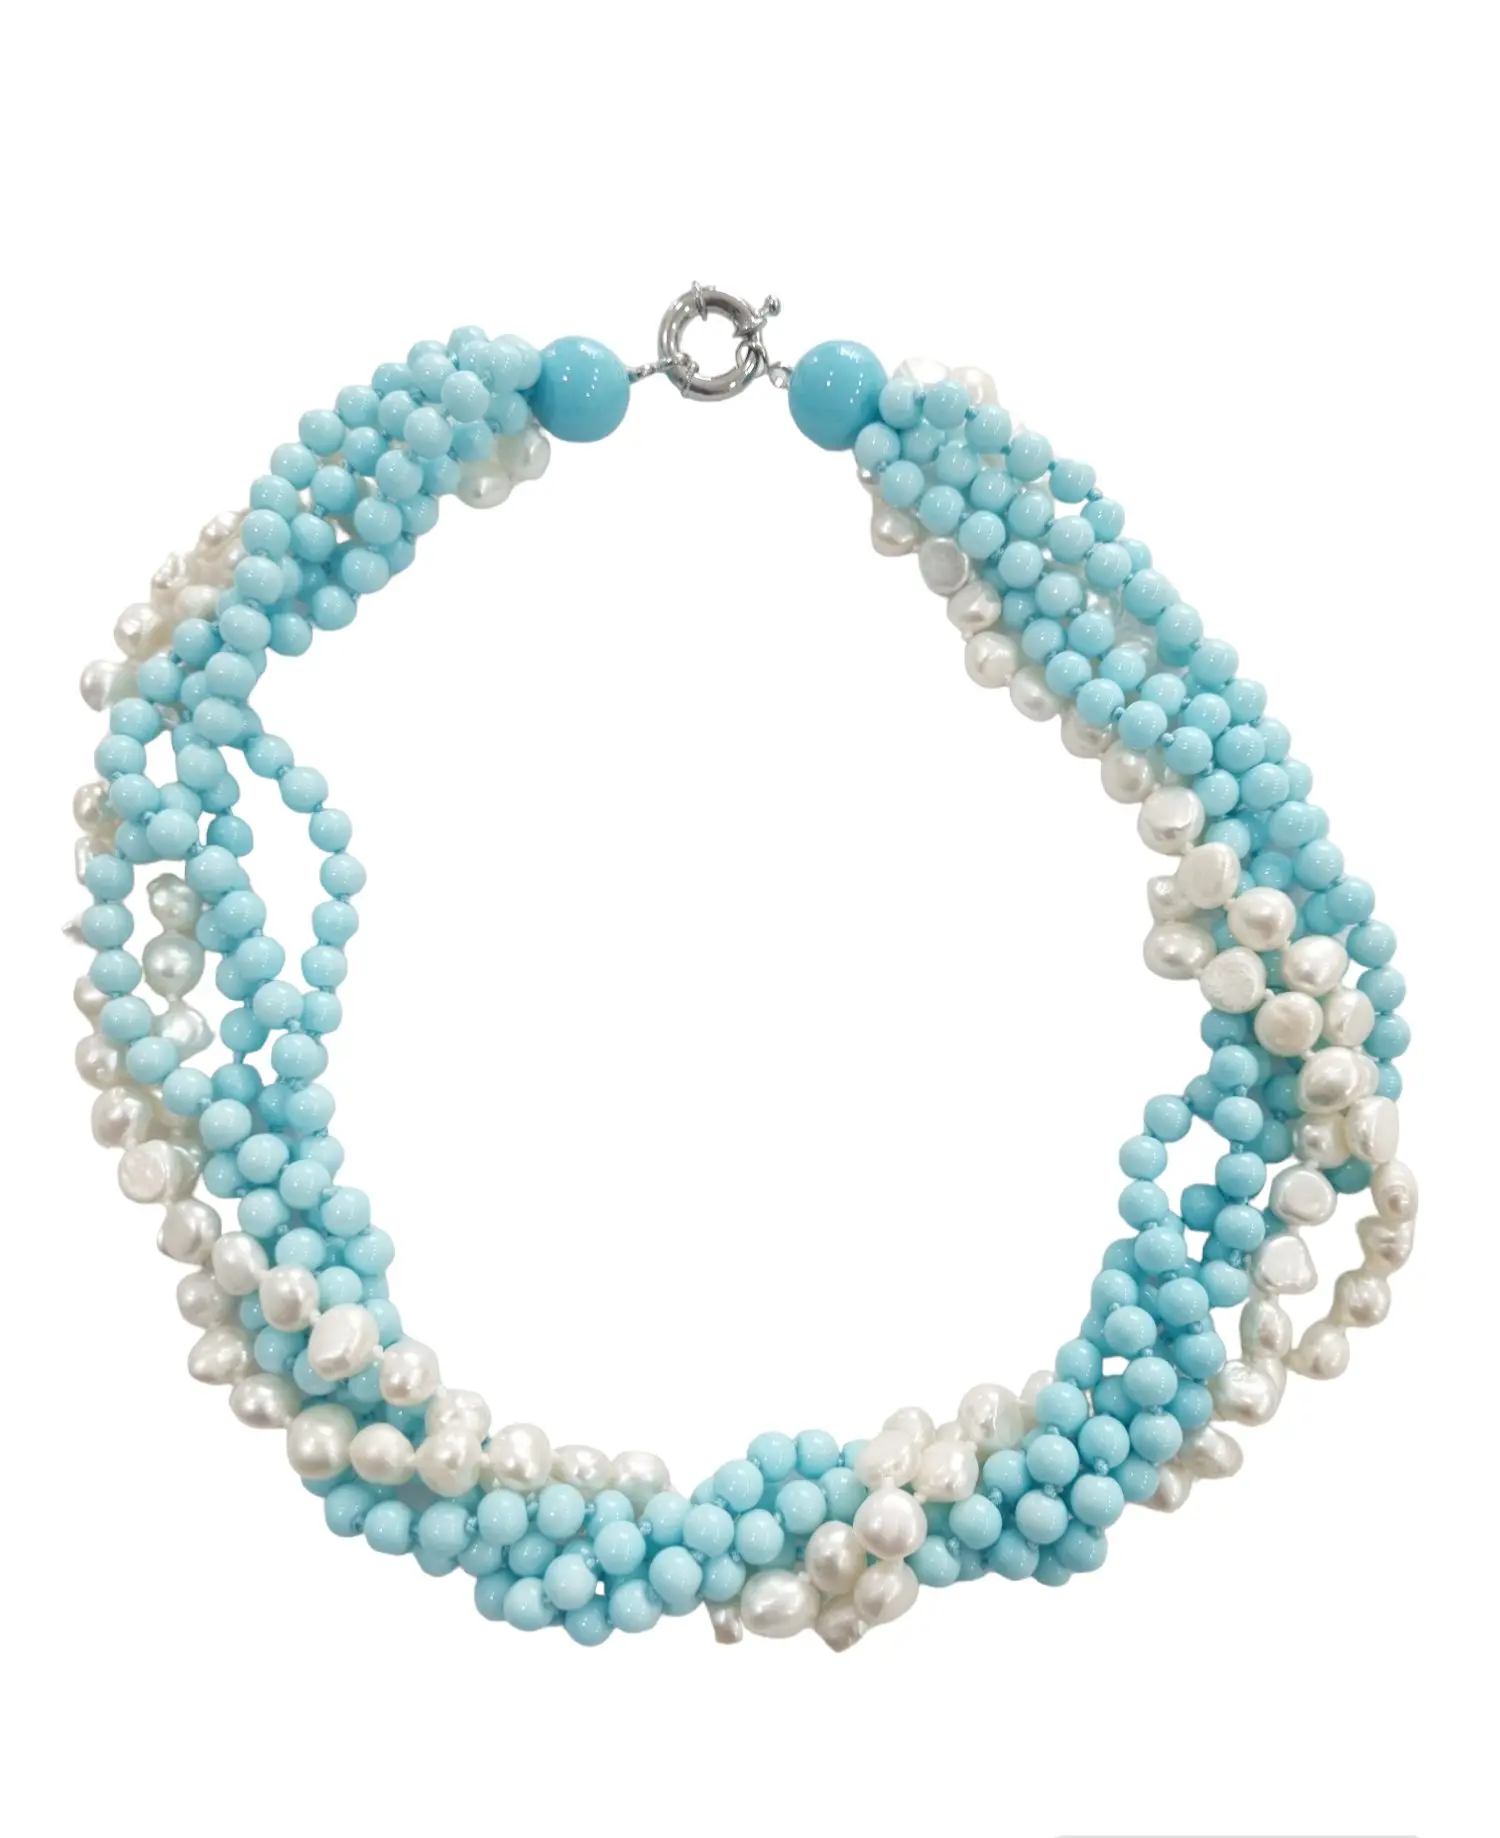 Choker Necklace: twist made with freshwater pearls and turquoise paste. Steel clasp. Length 49cm